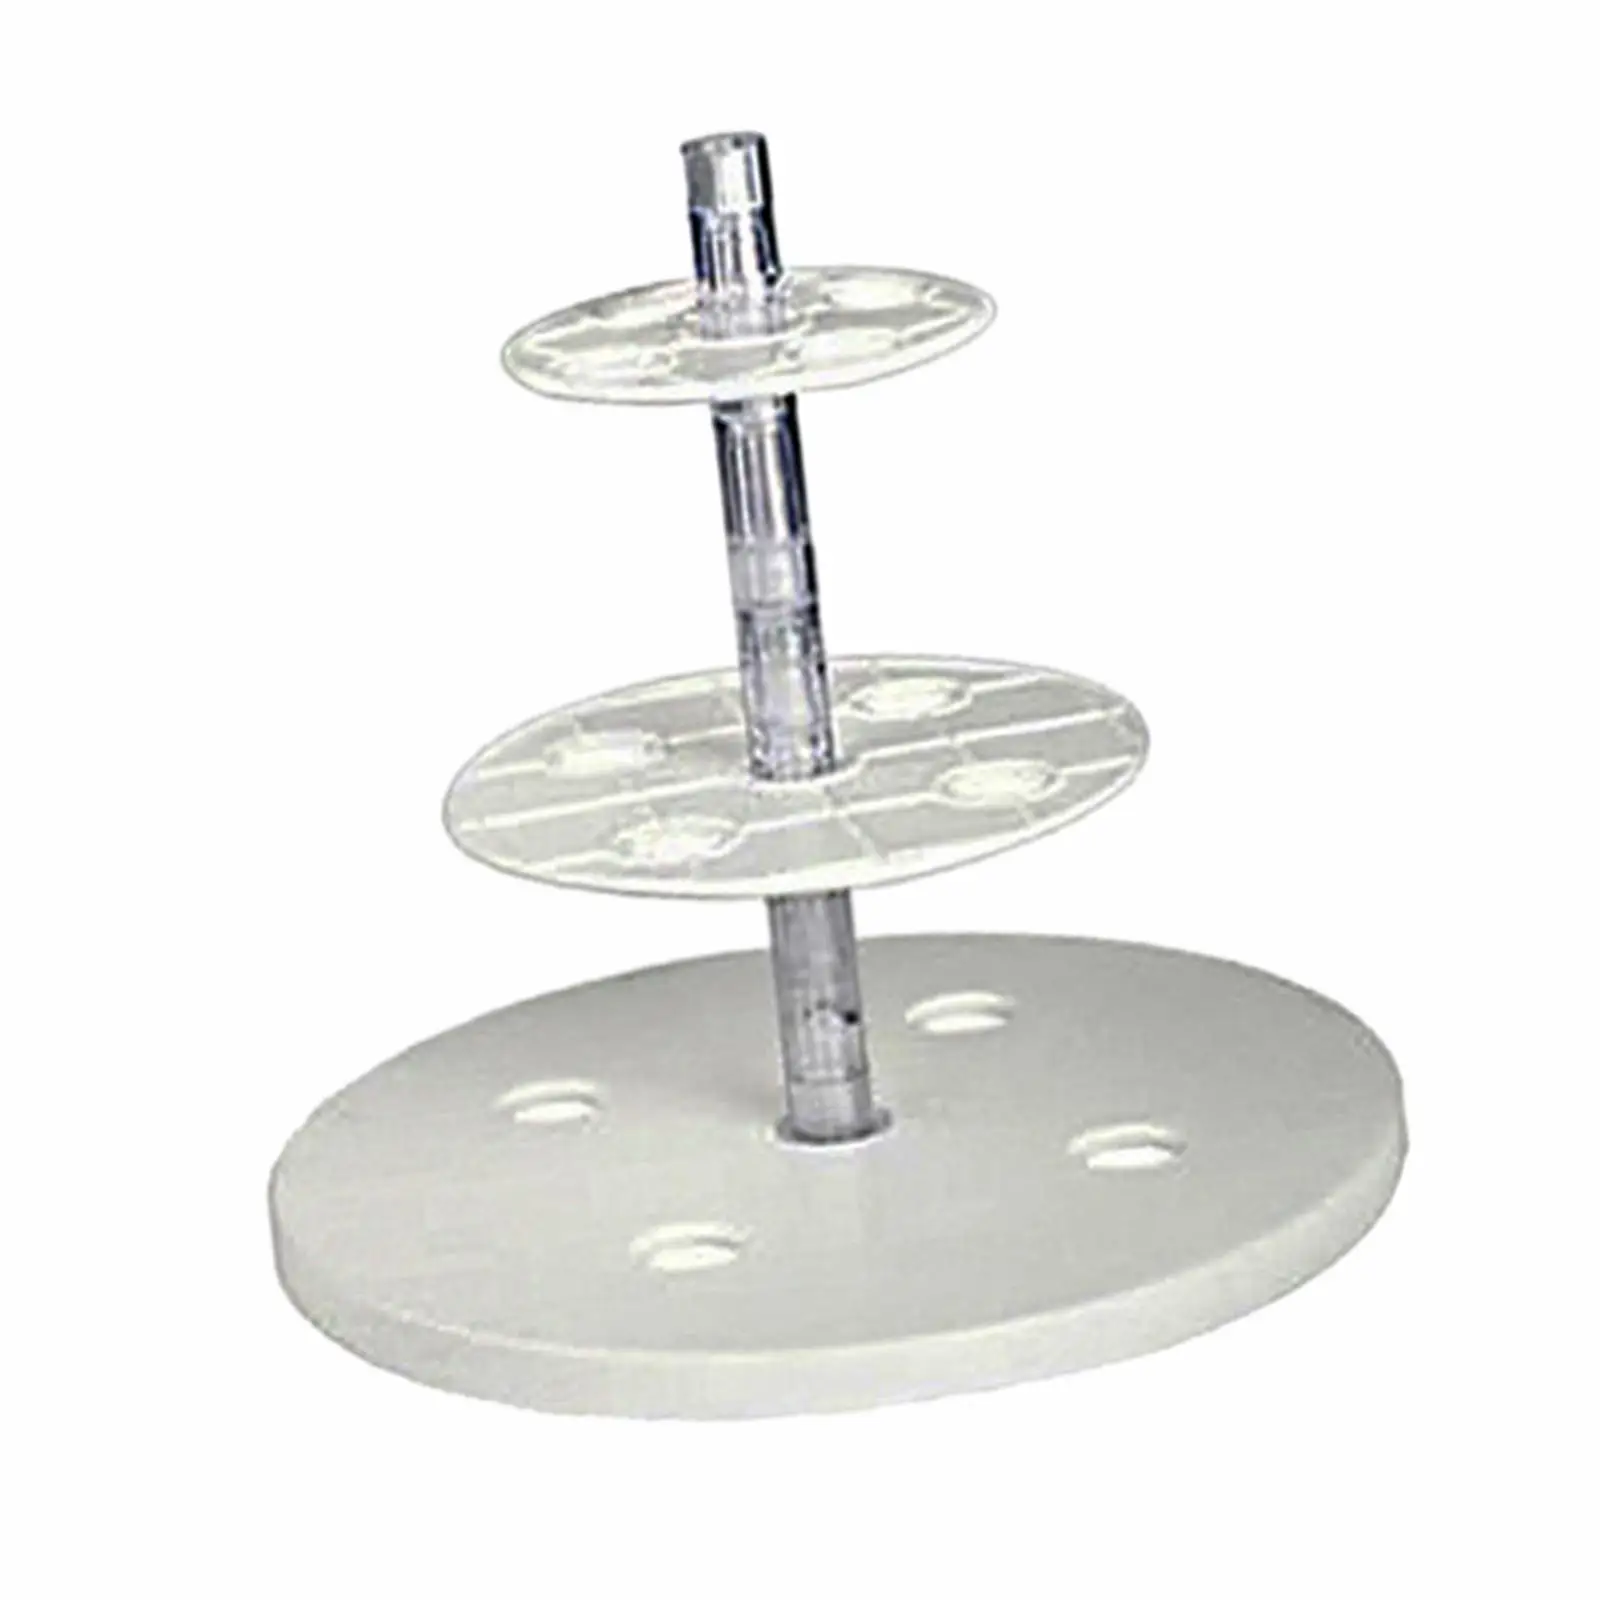 3 Tier Cake Stand Cupcake Towers Holder Pastry Holder Cupcake Display Plate for Anniversary Parties Baby Shower Wedding Cake